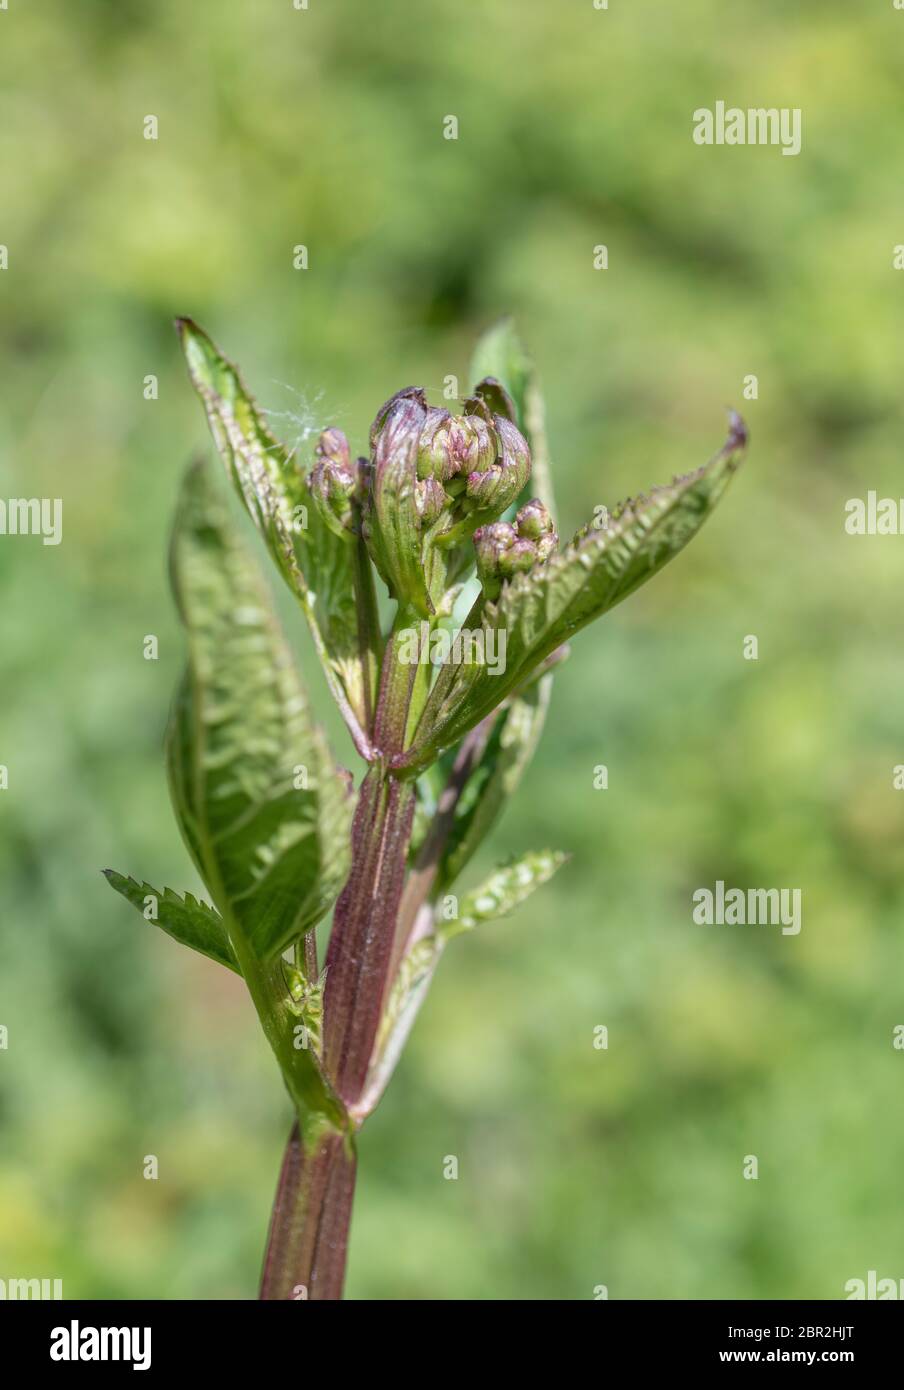 Flower buds & young leaves of Figwort. Unclear whether Scrophularia aquatica or Scrophularia nodosa. Both medicinal plants used in herbal cures. Stock Photo